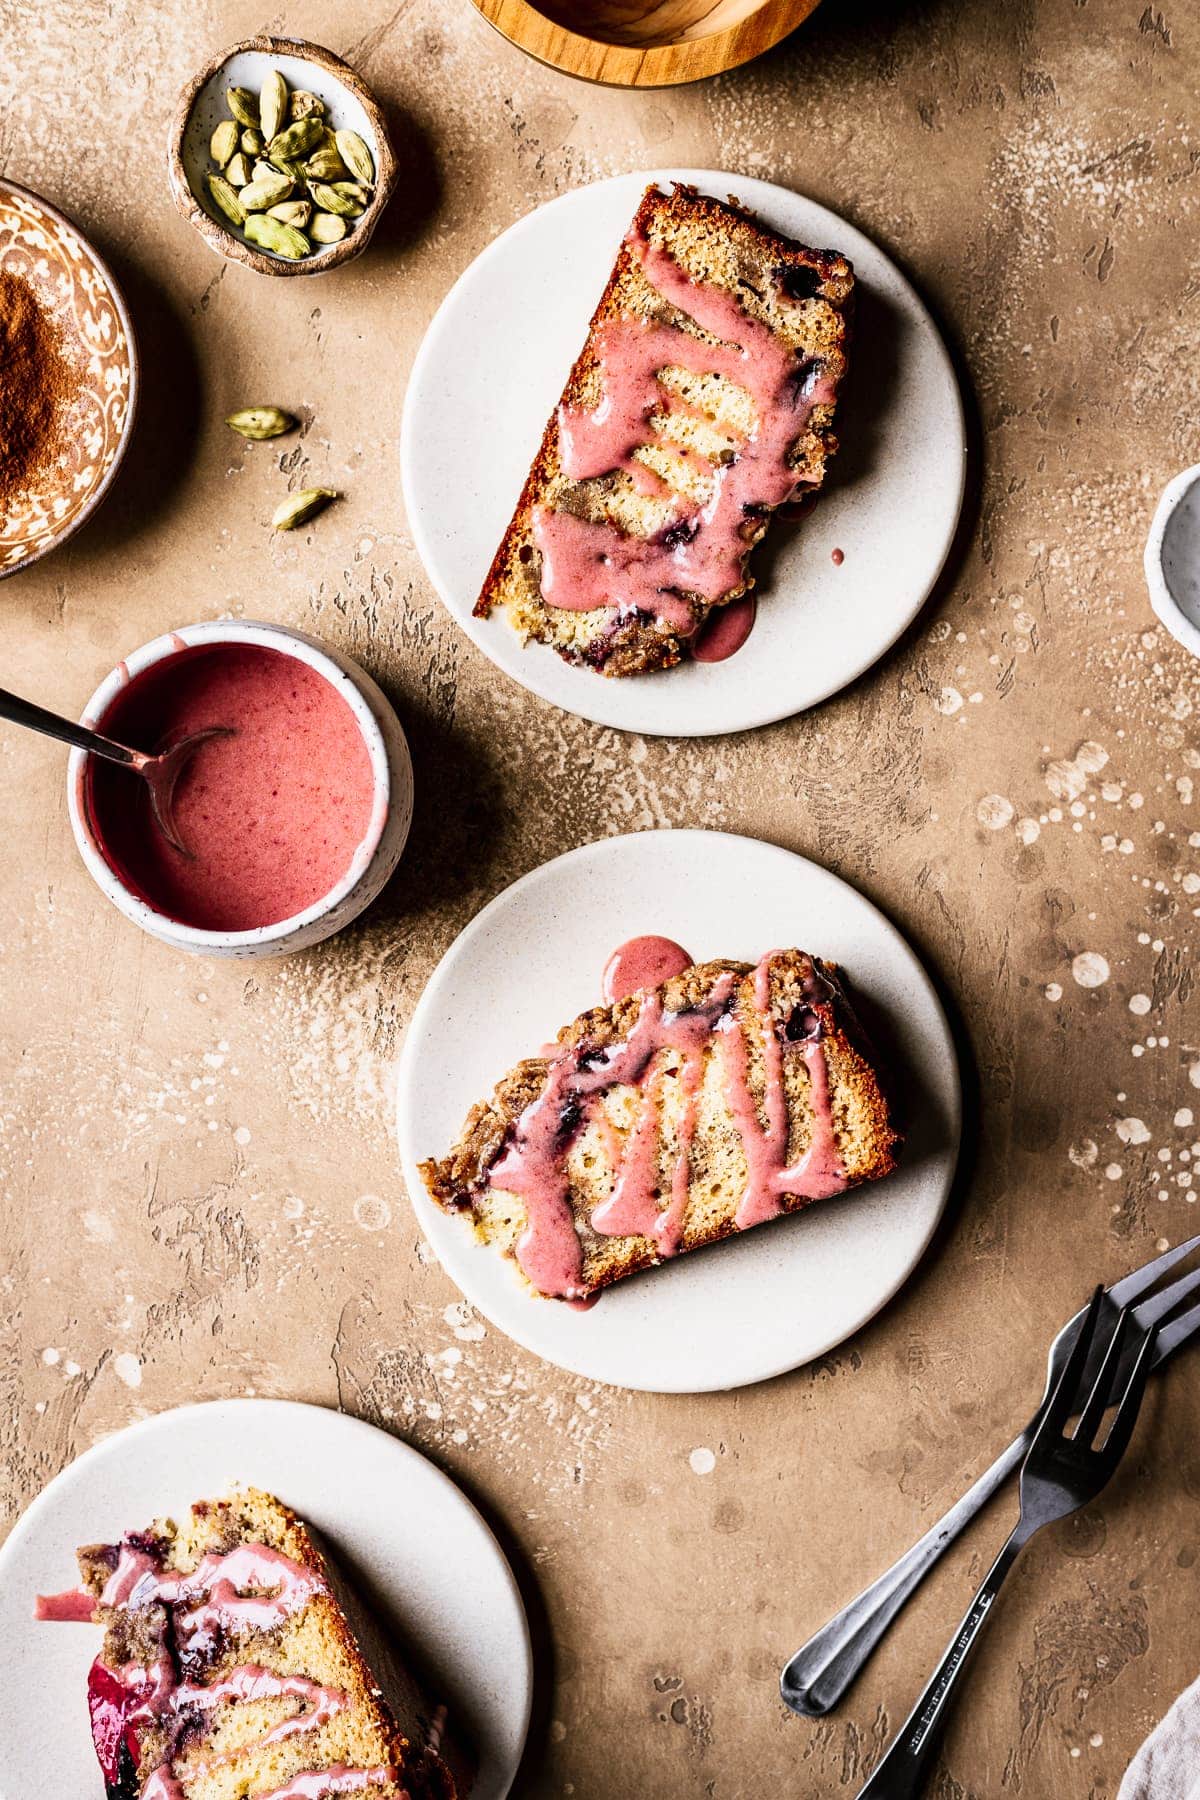 Slices of cake drizzled with pink glaze rest on their sides on light colored ceramic plates topped with plum slices. The background is a warm tan color. Surrounding the cake slices are forks, sliced plum halves, a bowl of pink glaze, and a small bowl of green cardamom pods.